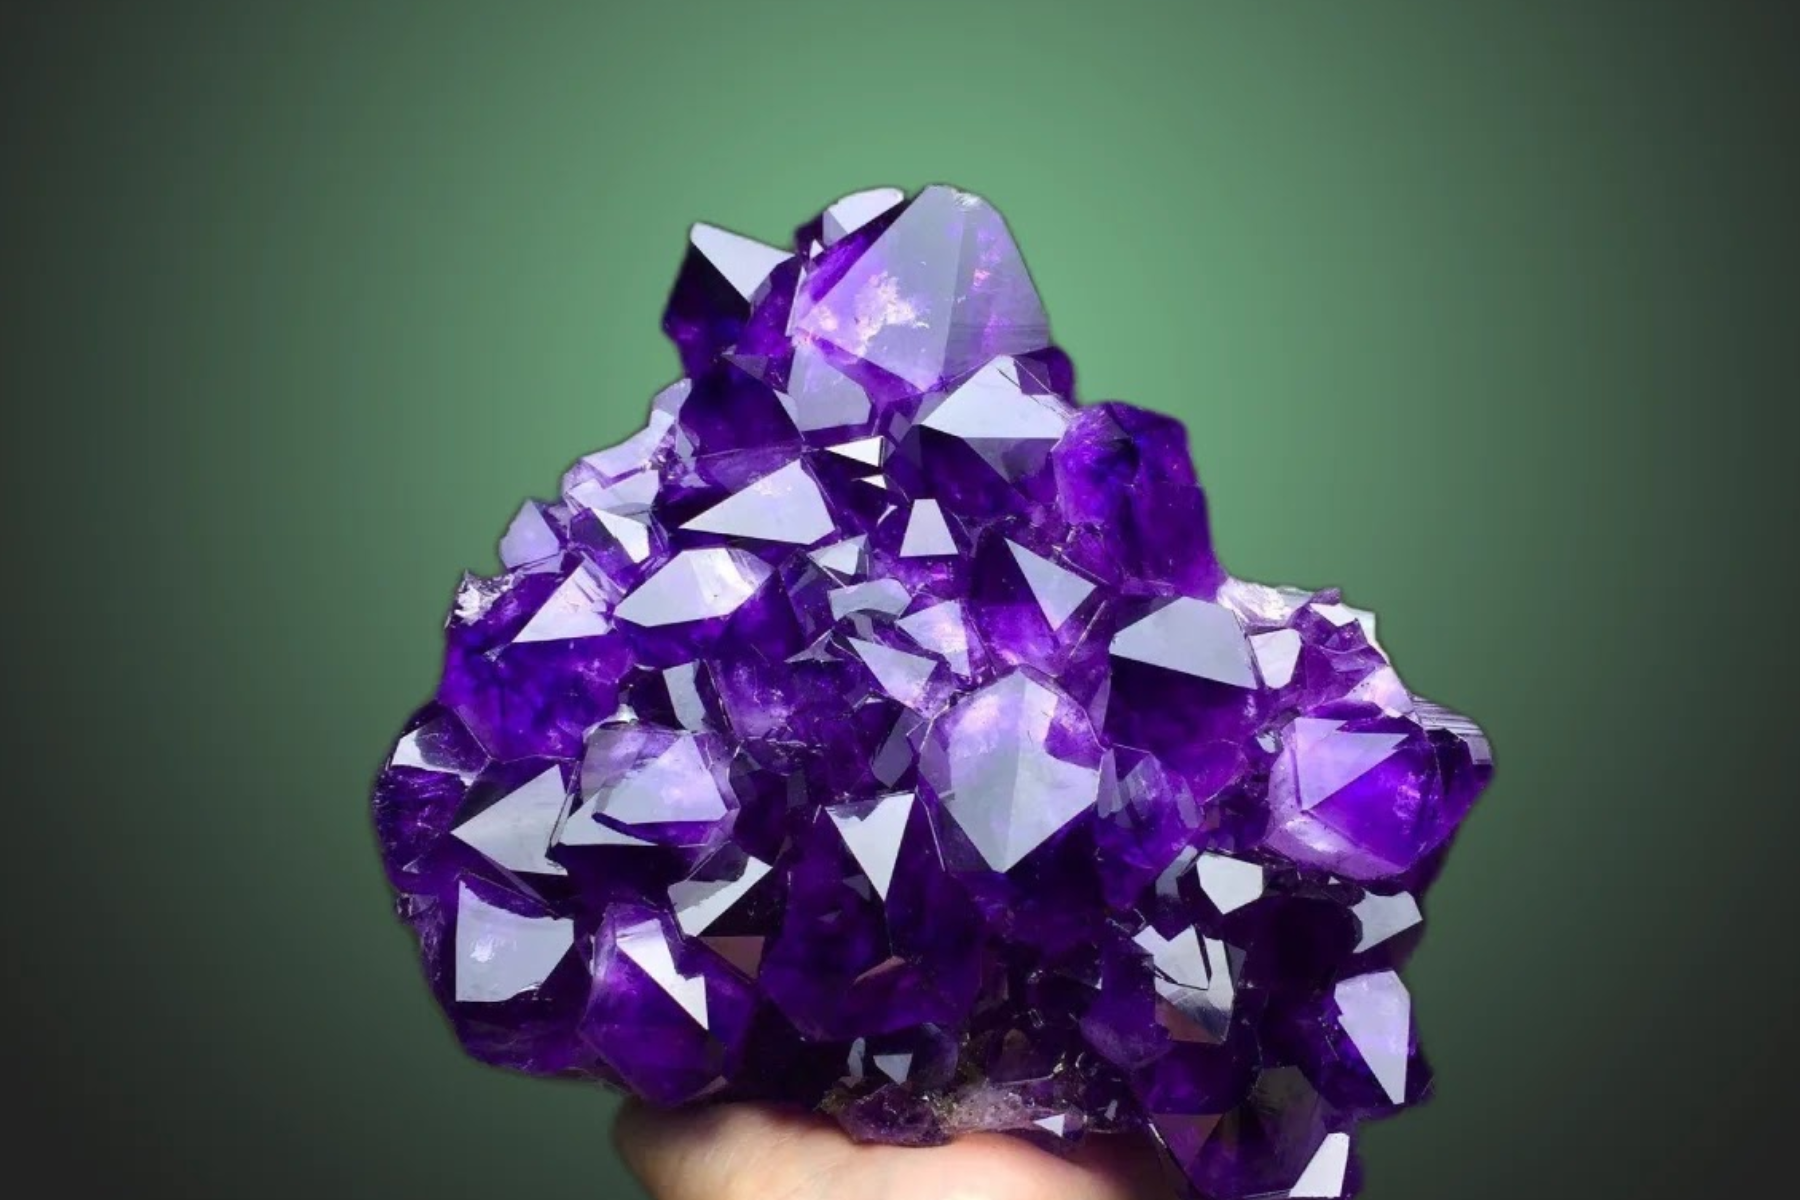 A large raw amethyst in a hand